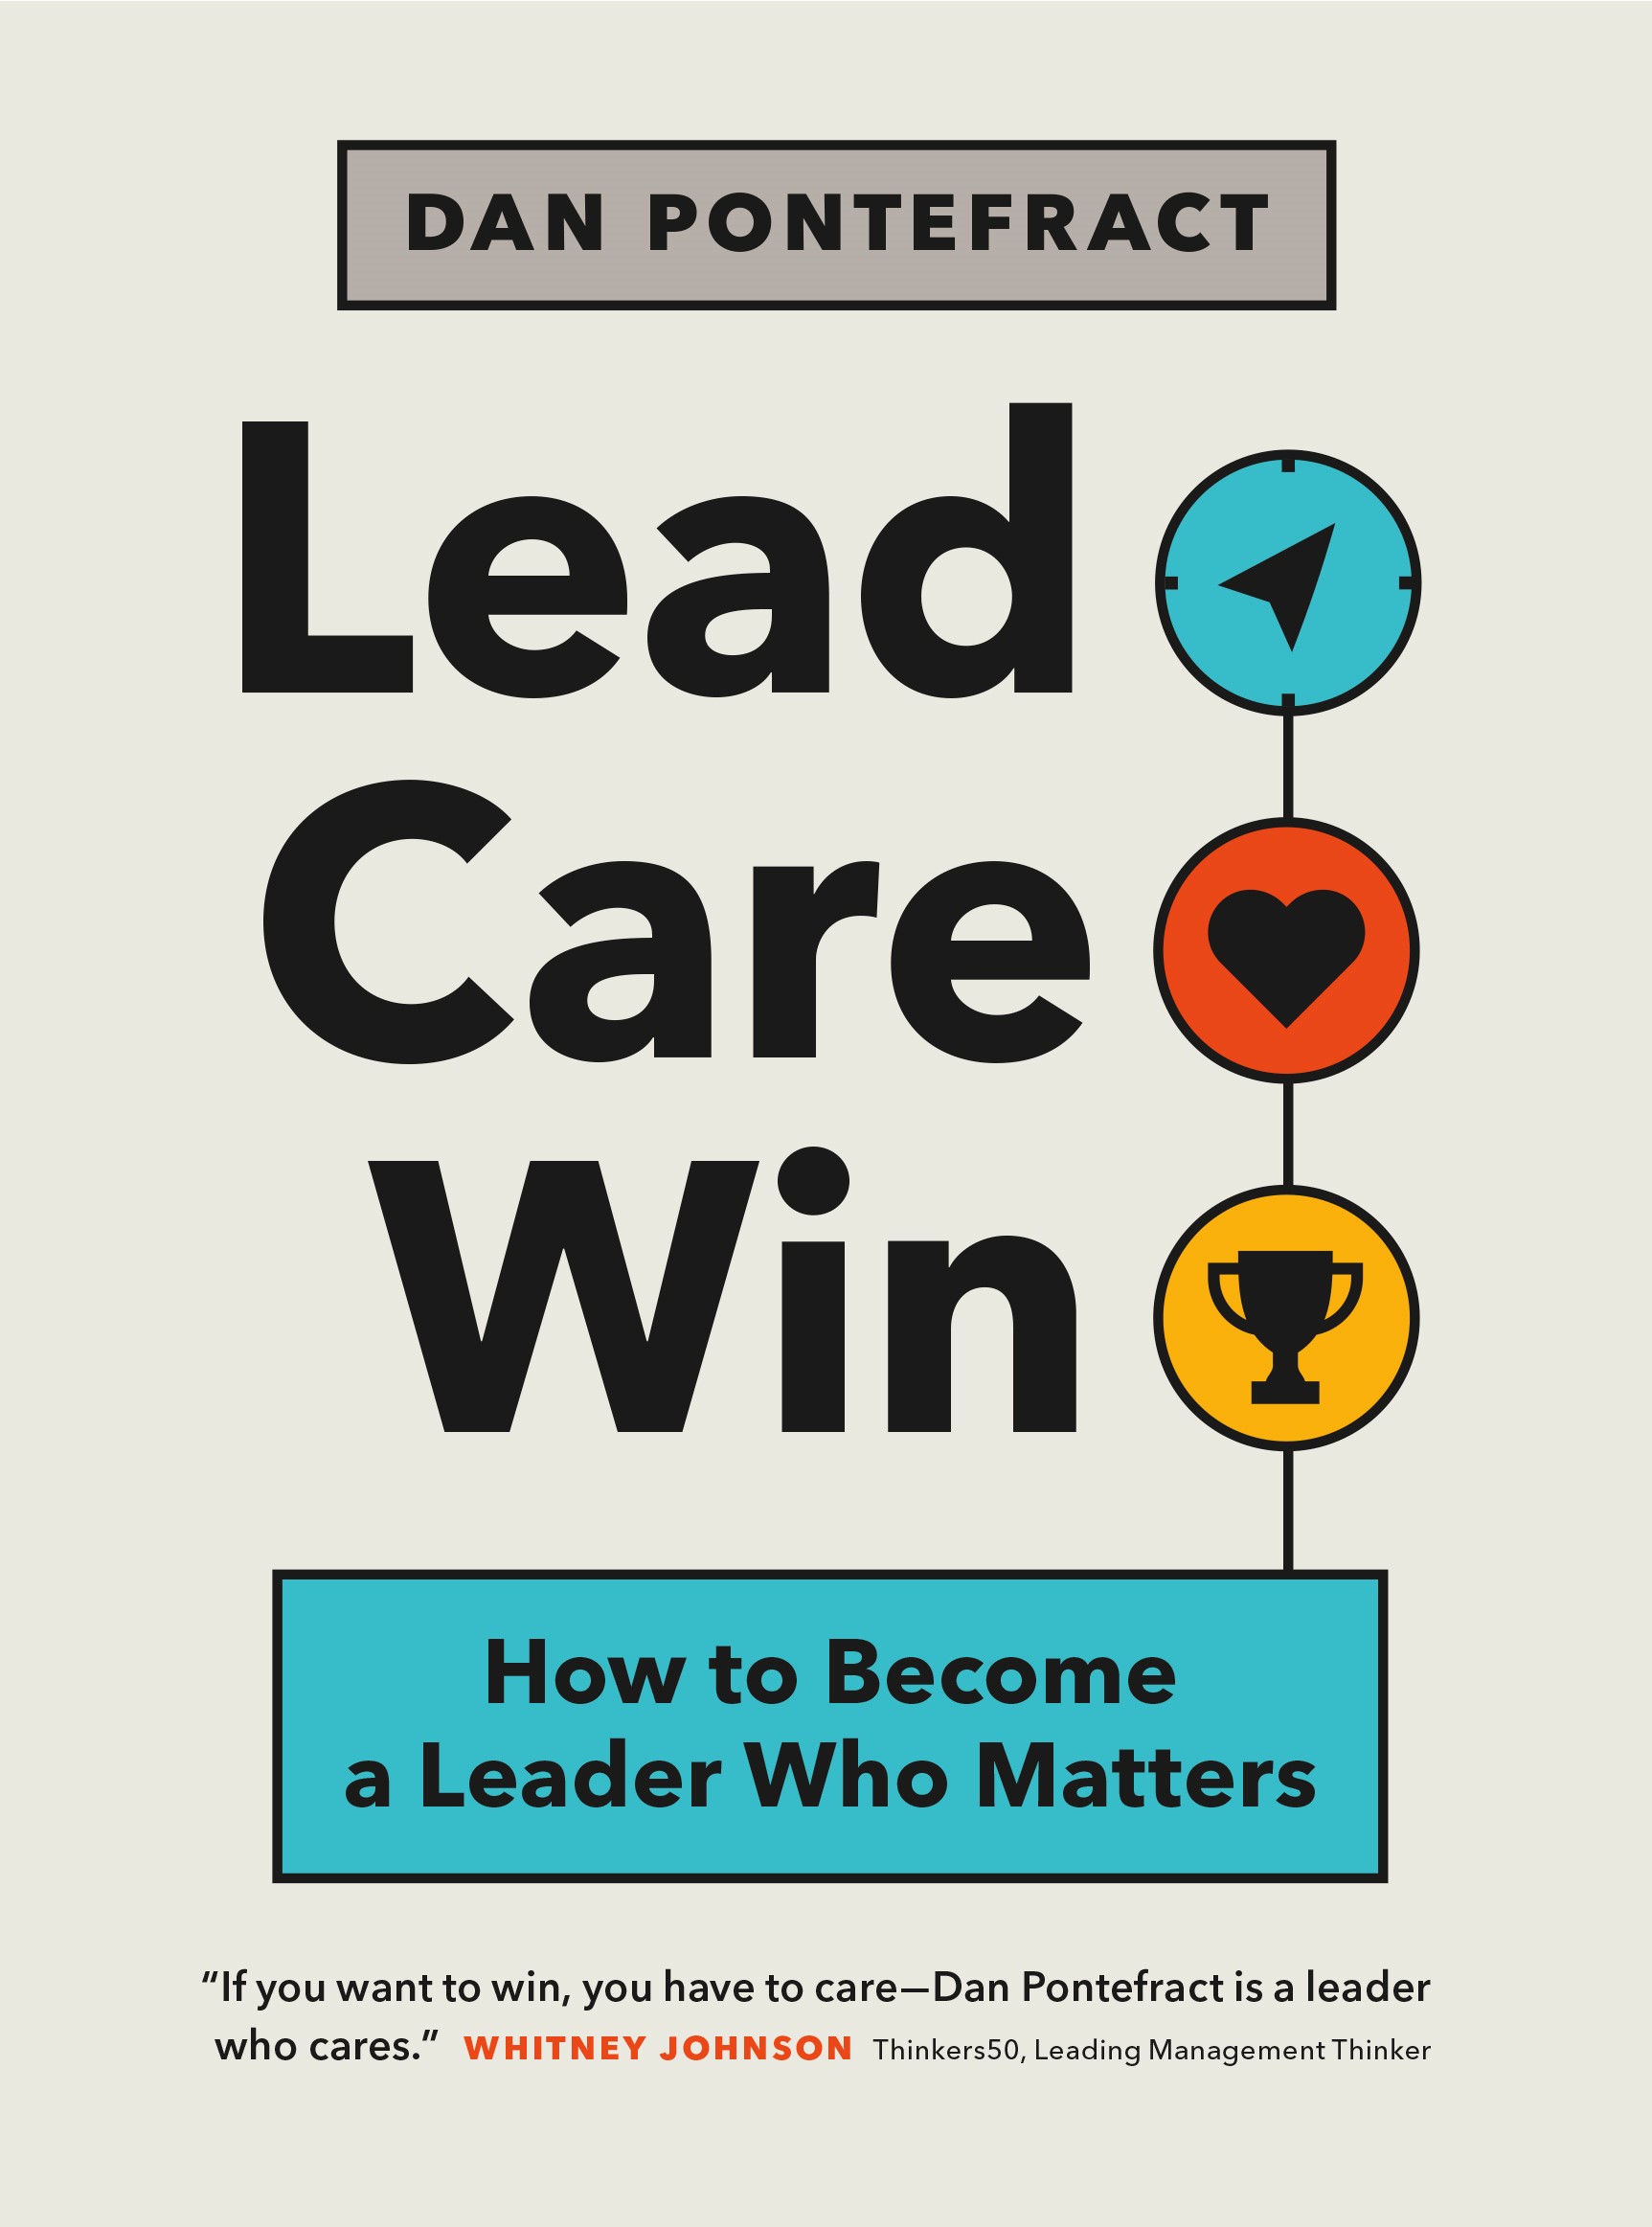 Lead. Care. Win. How to Become a Leader Who Matters by Dan Pontefract